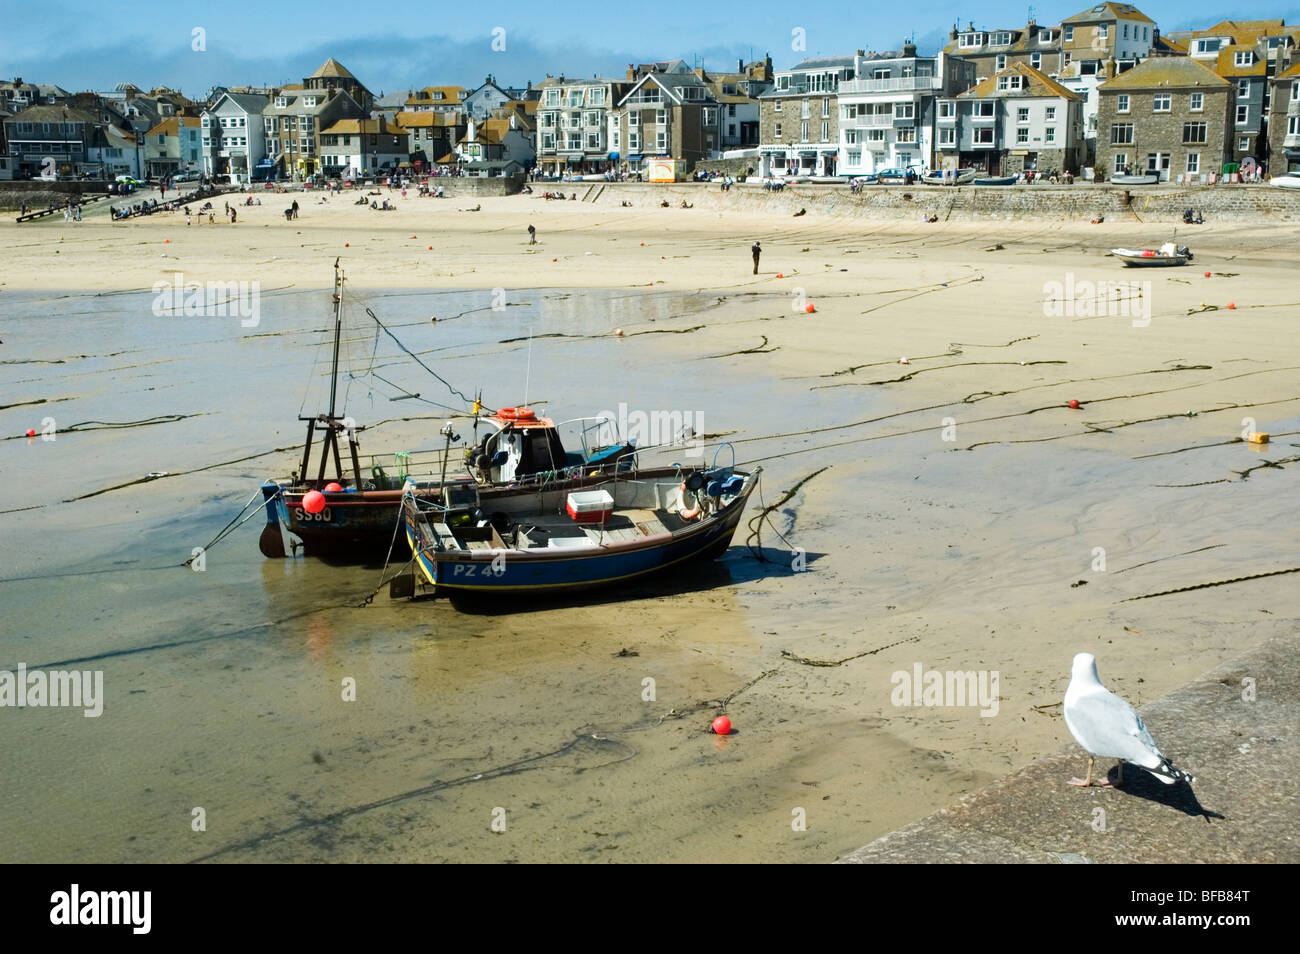 Fishing boats drawn up on the beach at St Ives, Cornwall, England Stock Photo